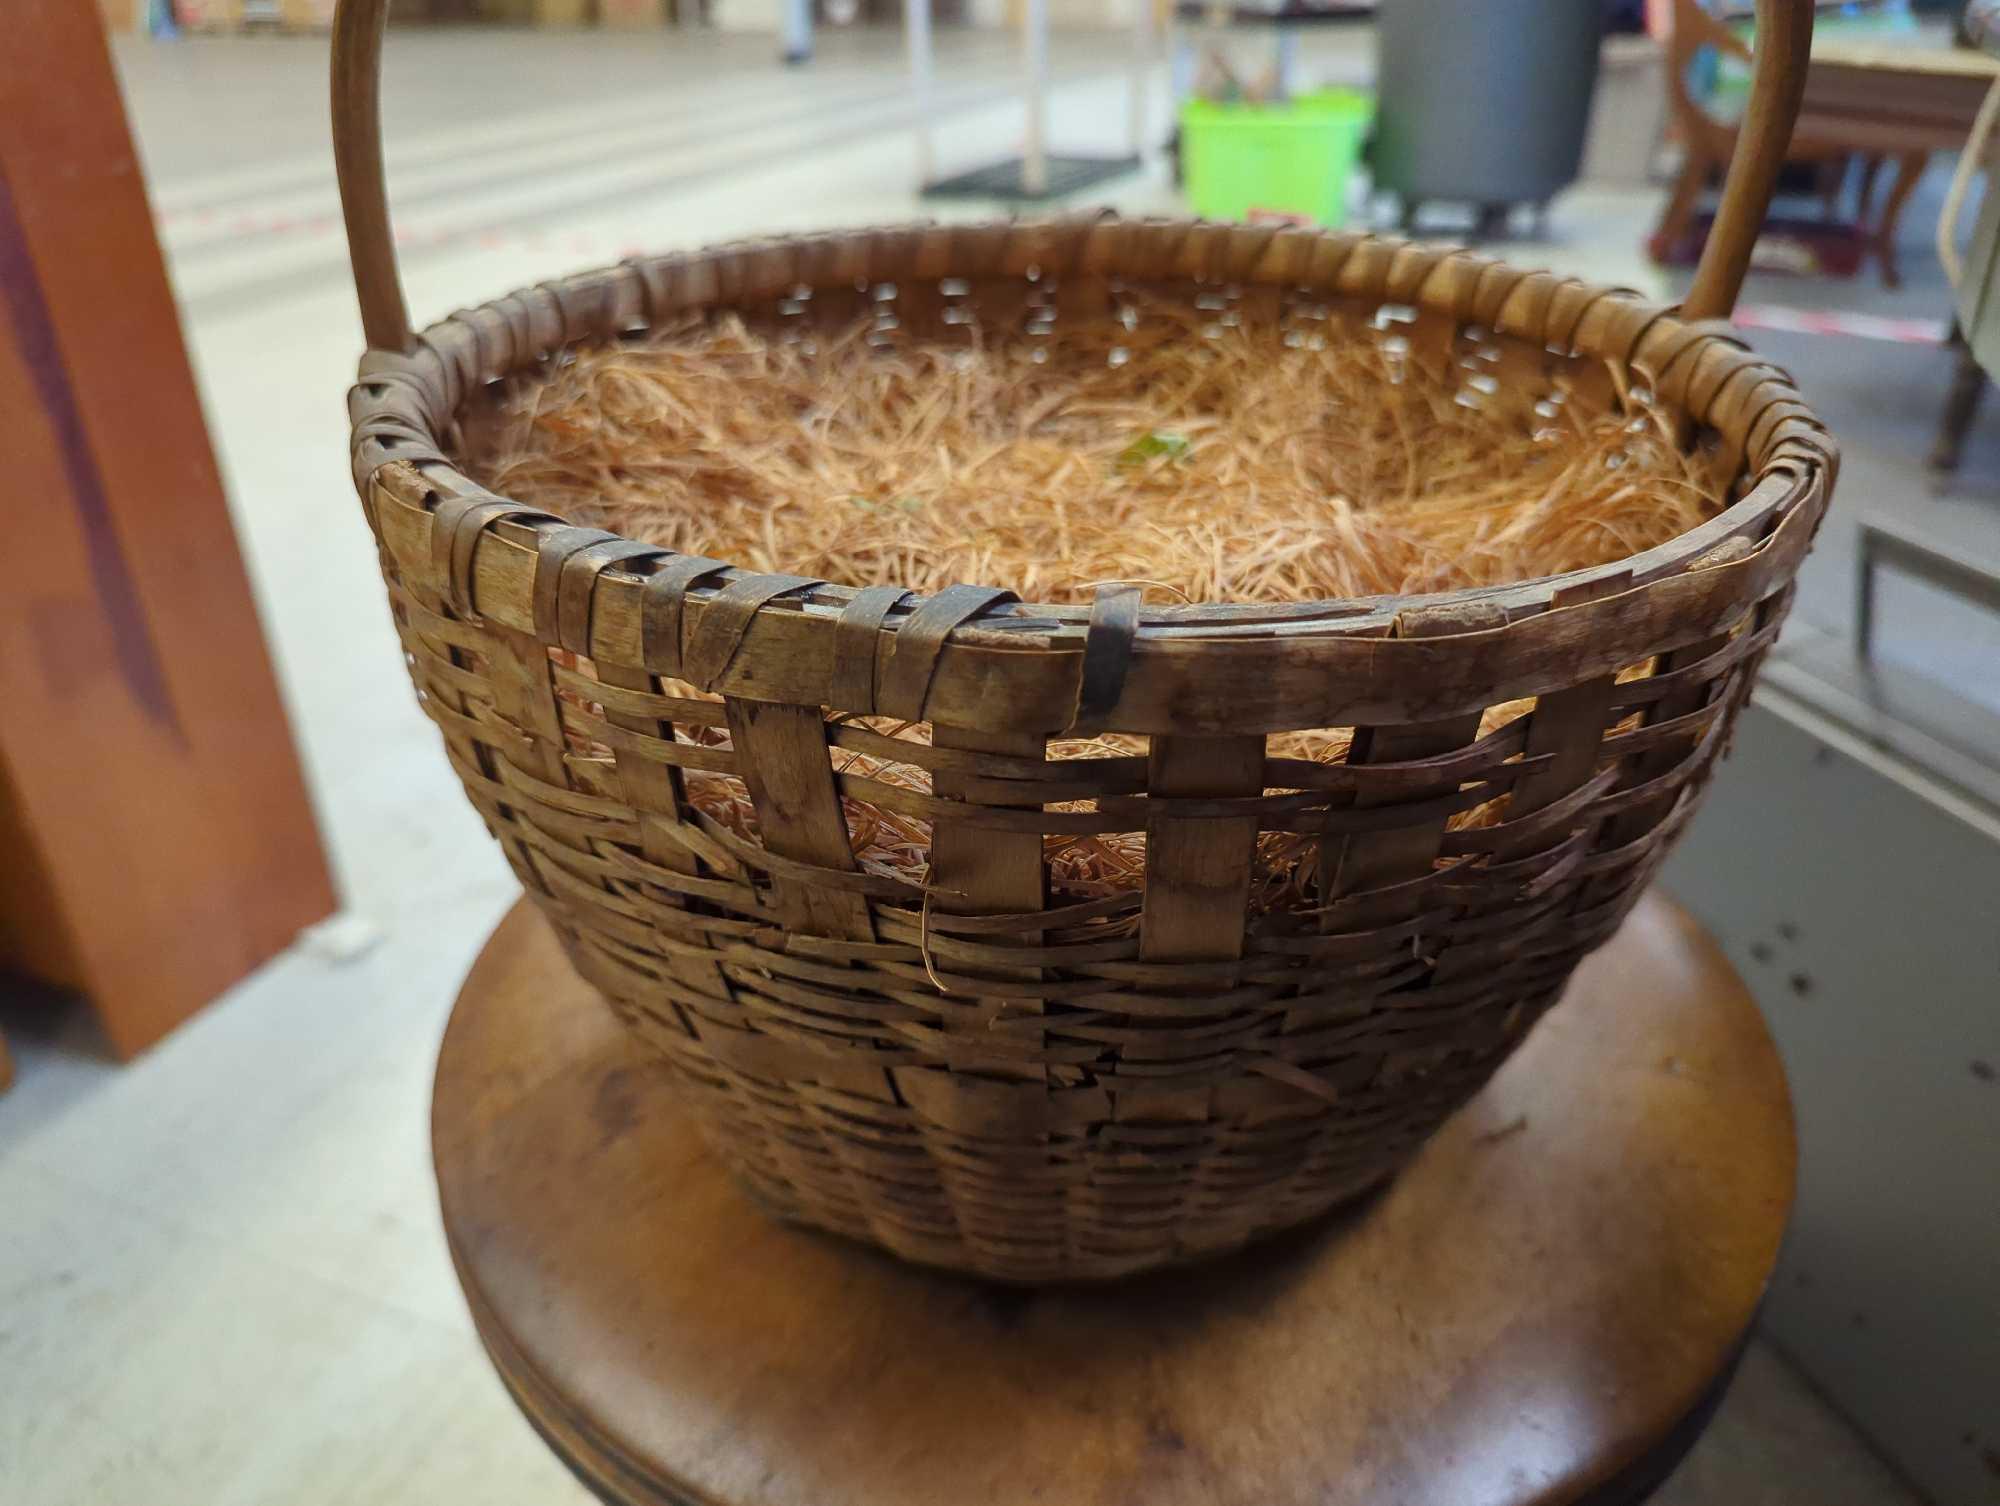 Round woven Egg Basket With Top handle and Straw As A Decoration, Measure Approximately 11.5 in x 11